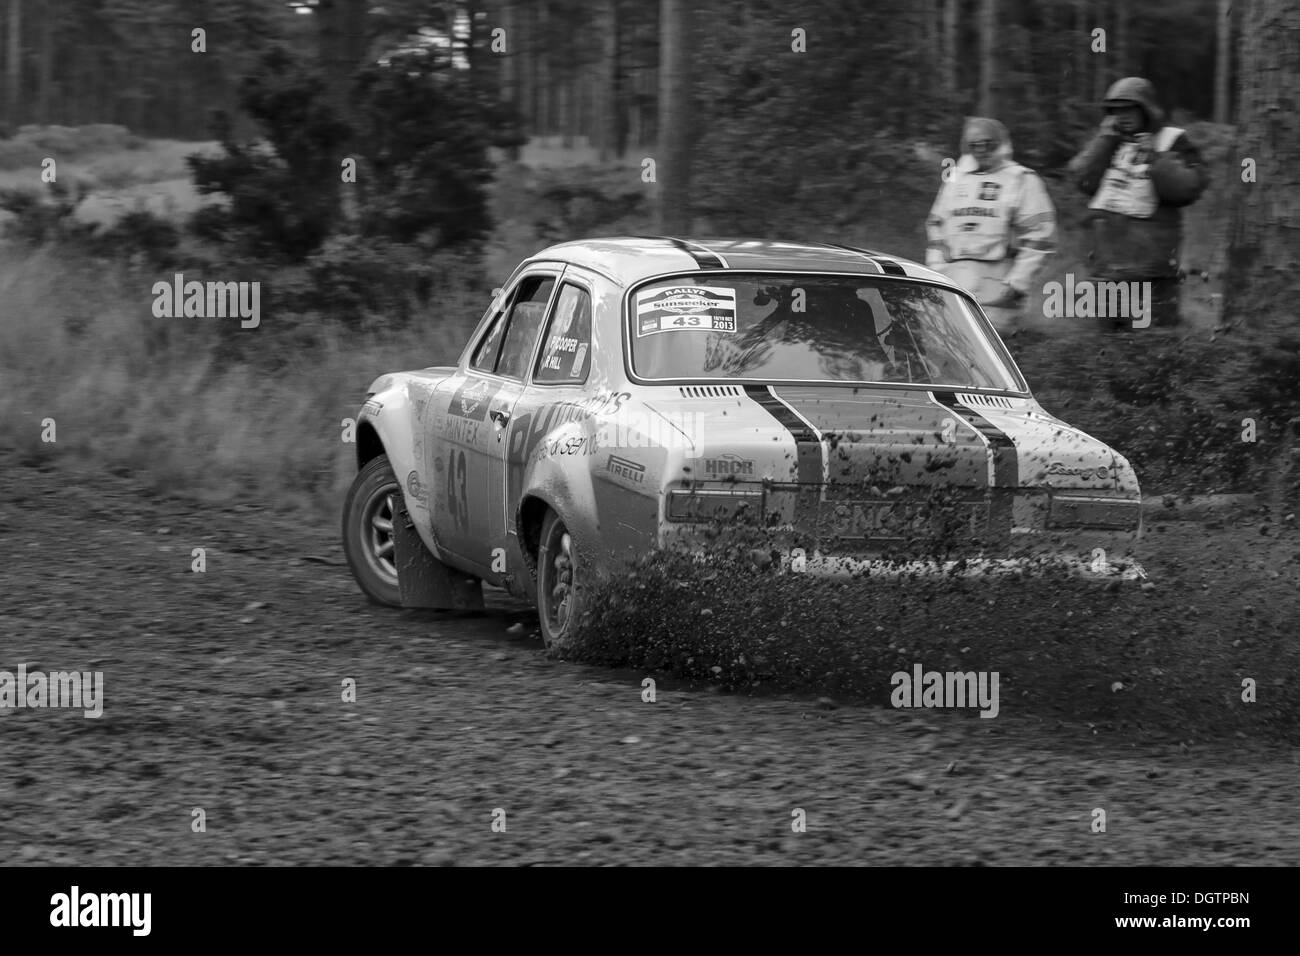 Ford escort Rally car taking part in the Rallye Sunseeker 2013 Stock Photo